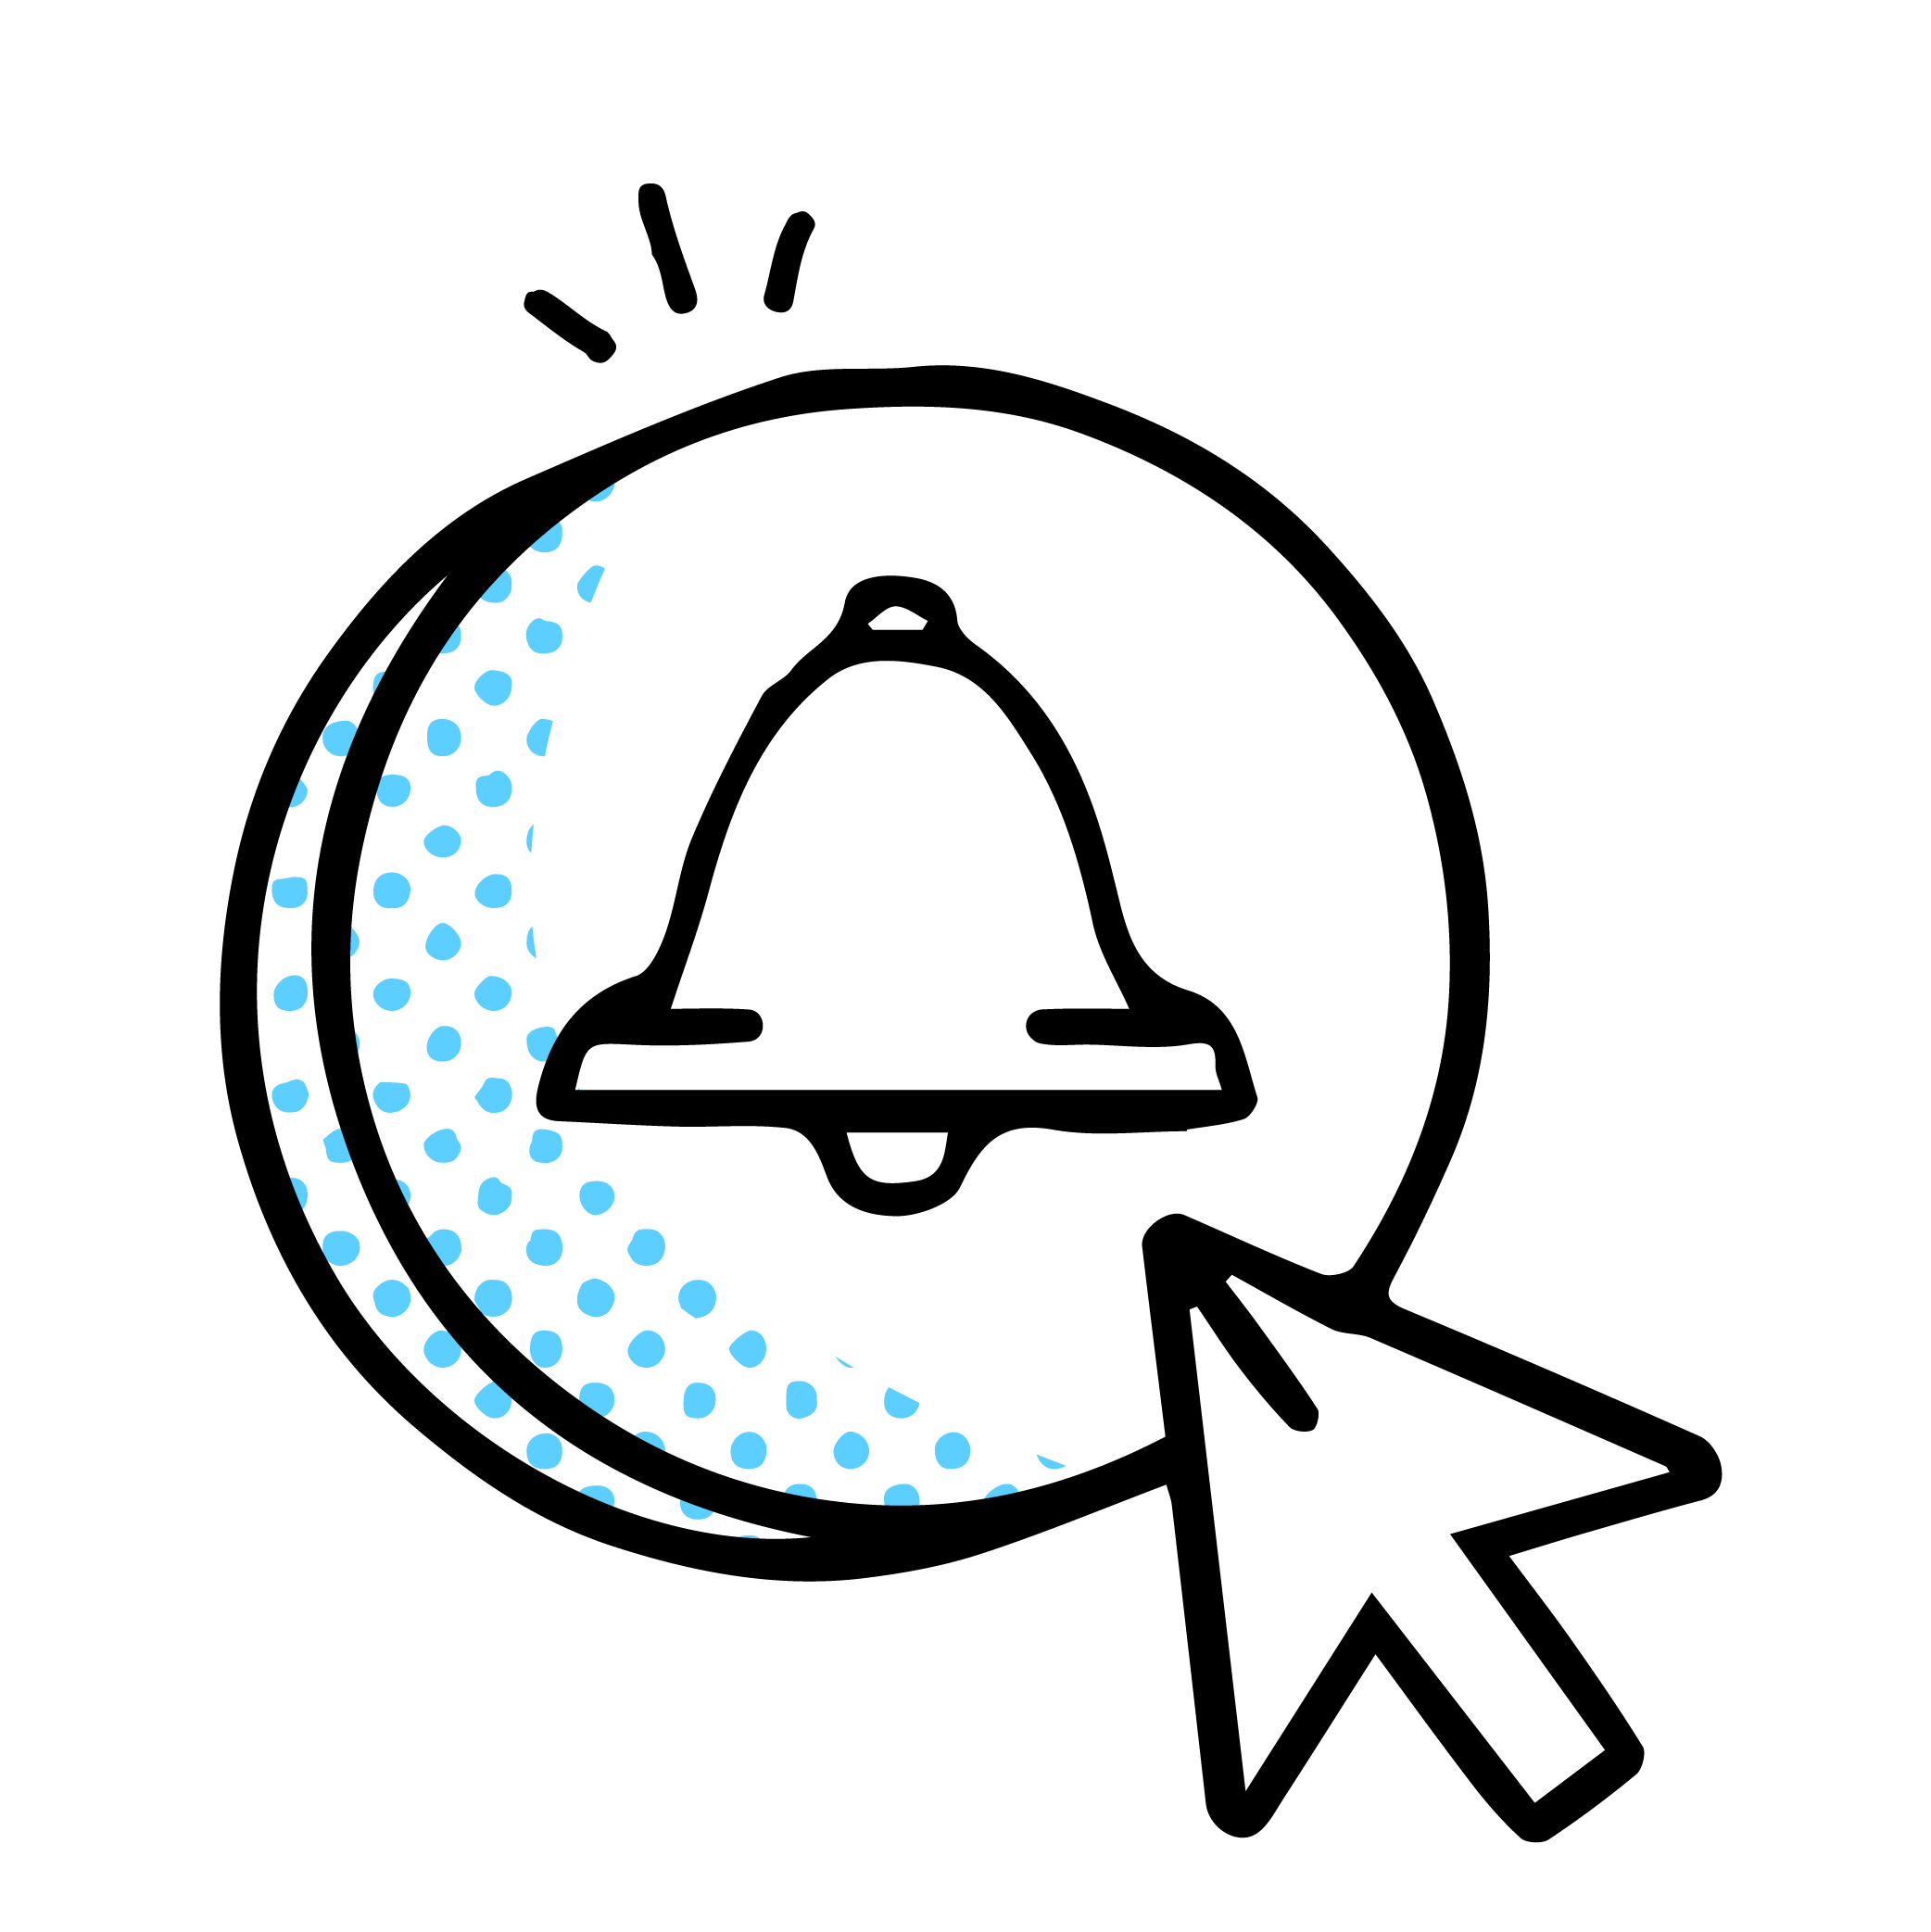 An illustration in black linework with blue halftone accents of a computer cursor clicking on a circular button that depicts a bell